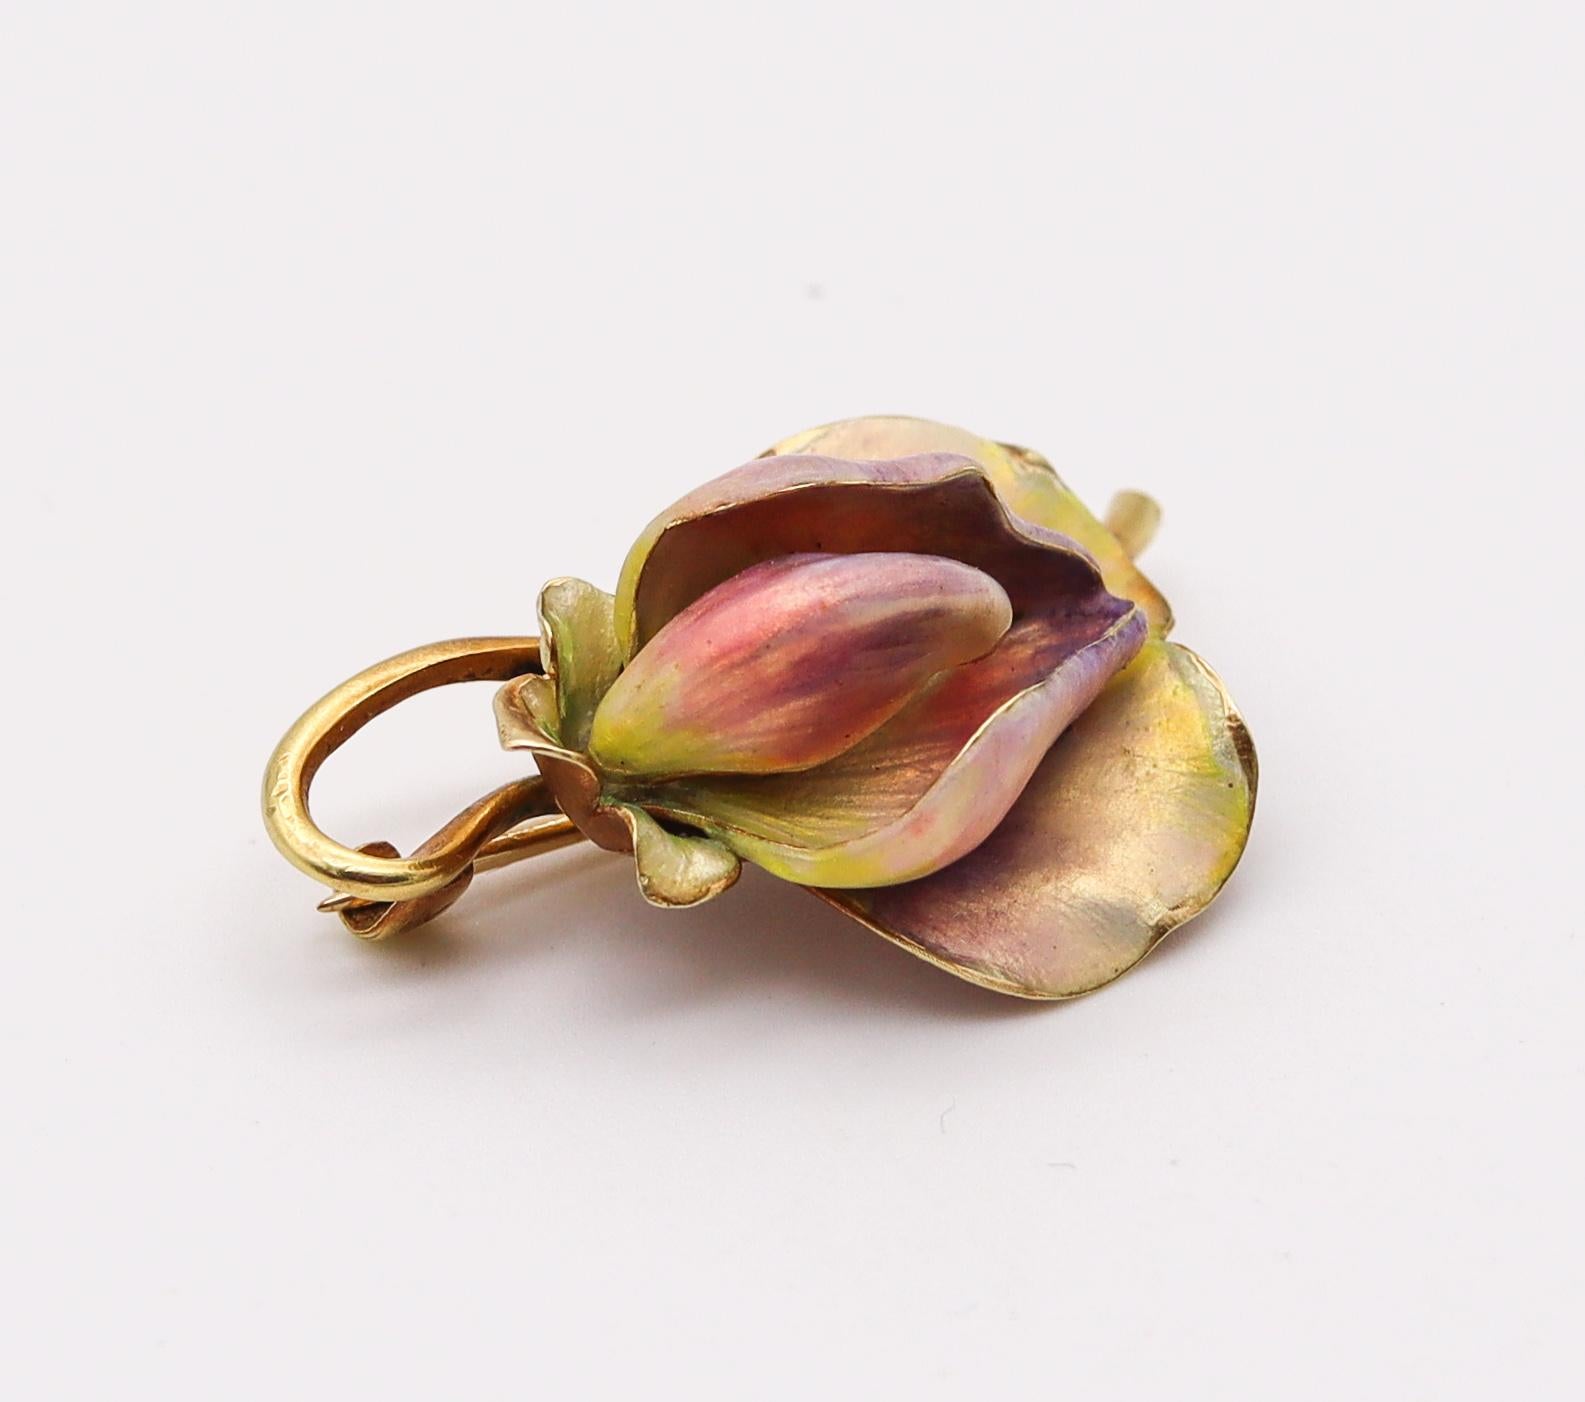 Edwardian art nouveau enamel Orchid brooch.

An exceptional three-dimensional piece, created in America during the Edwardian and the Art Nouveau periods, back in the 1901-1910. This rare beautiful pin brooch has been carefully crafted in solid